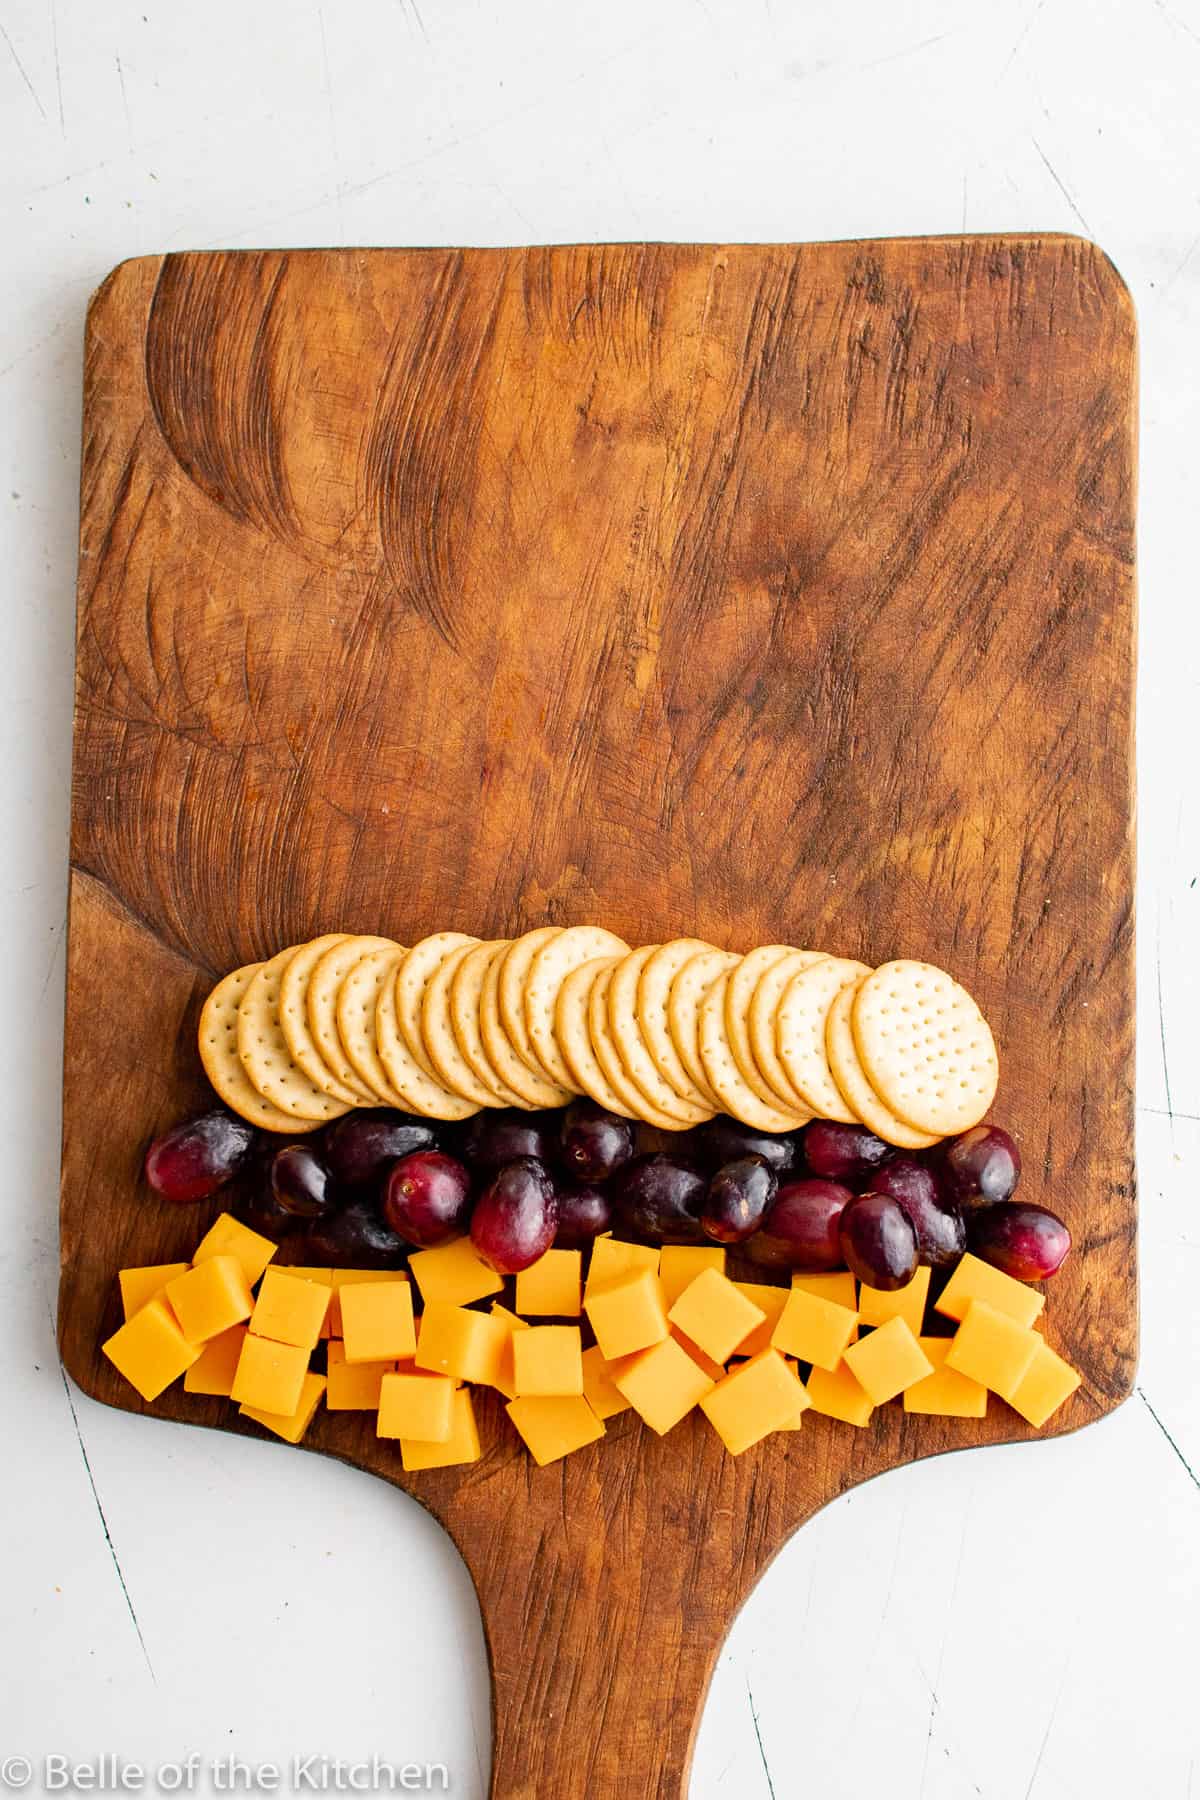 cut up cheese cubes, grapes, and crackers on a wooden cutting board.